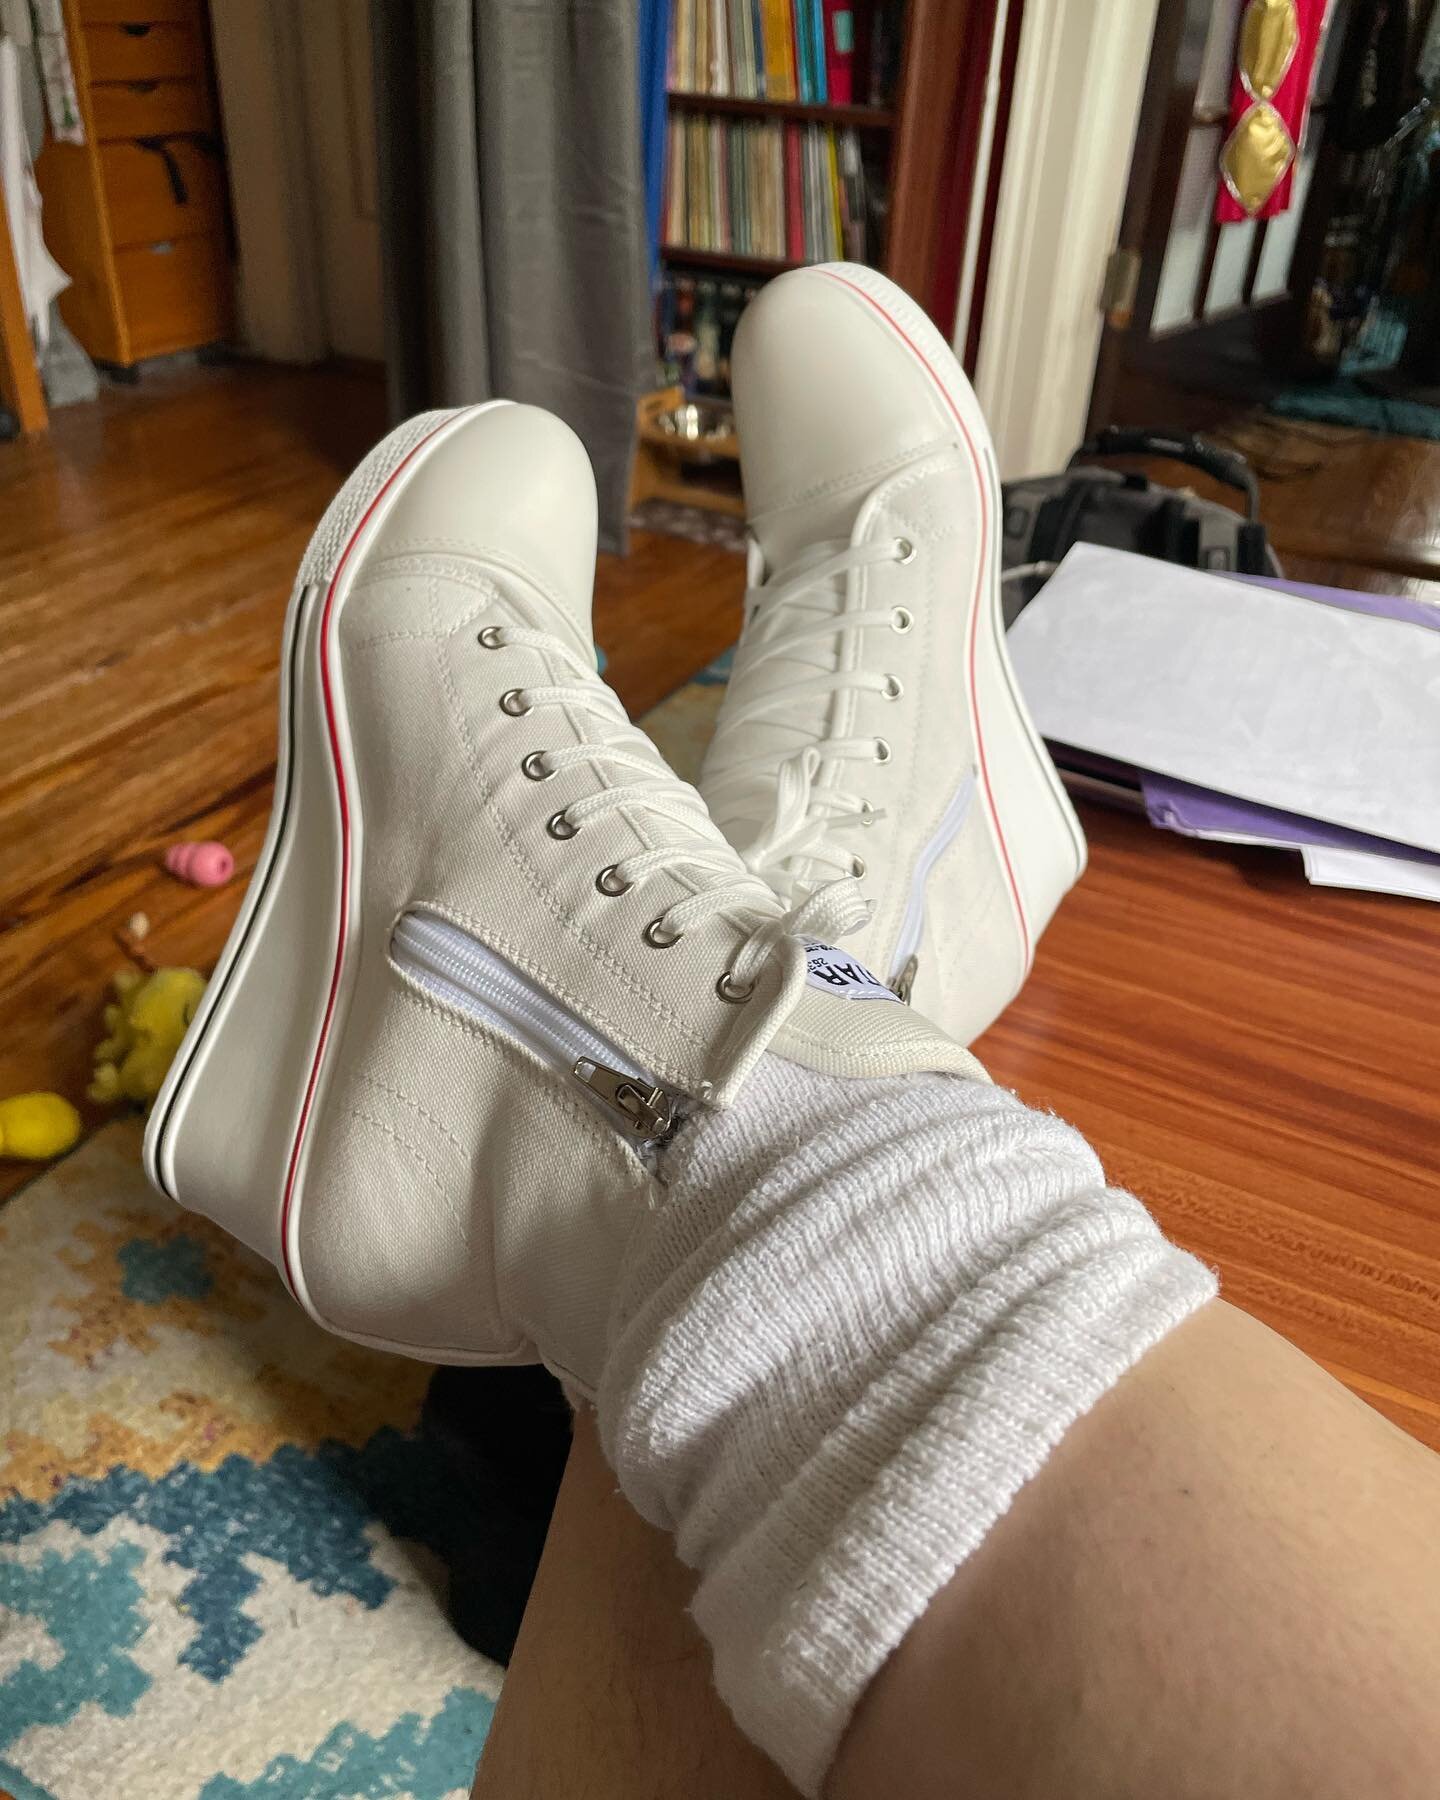 Todays installment of #RexyGotNewShoes a simple high top wedge sneaker. Will they stay white or will they be dyed to match a sporty outfit. To find out, come see &ldquo;The Legend of Georgia McBride&rdquo; this July at The Barnstormers Theatre in Tam